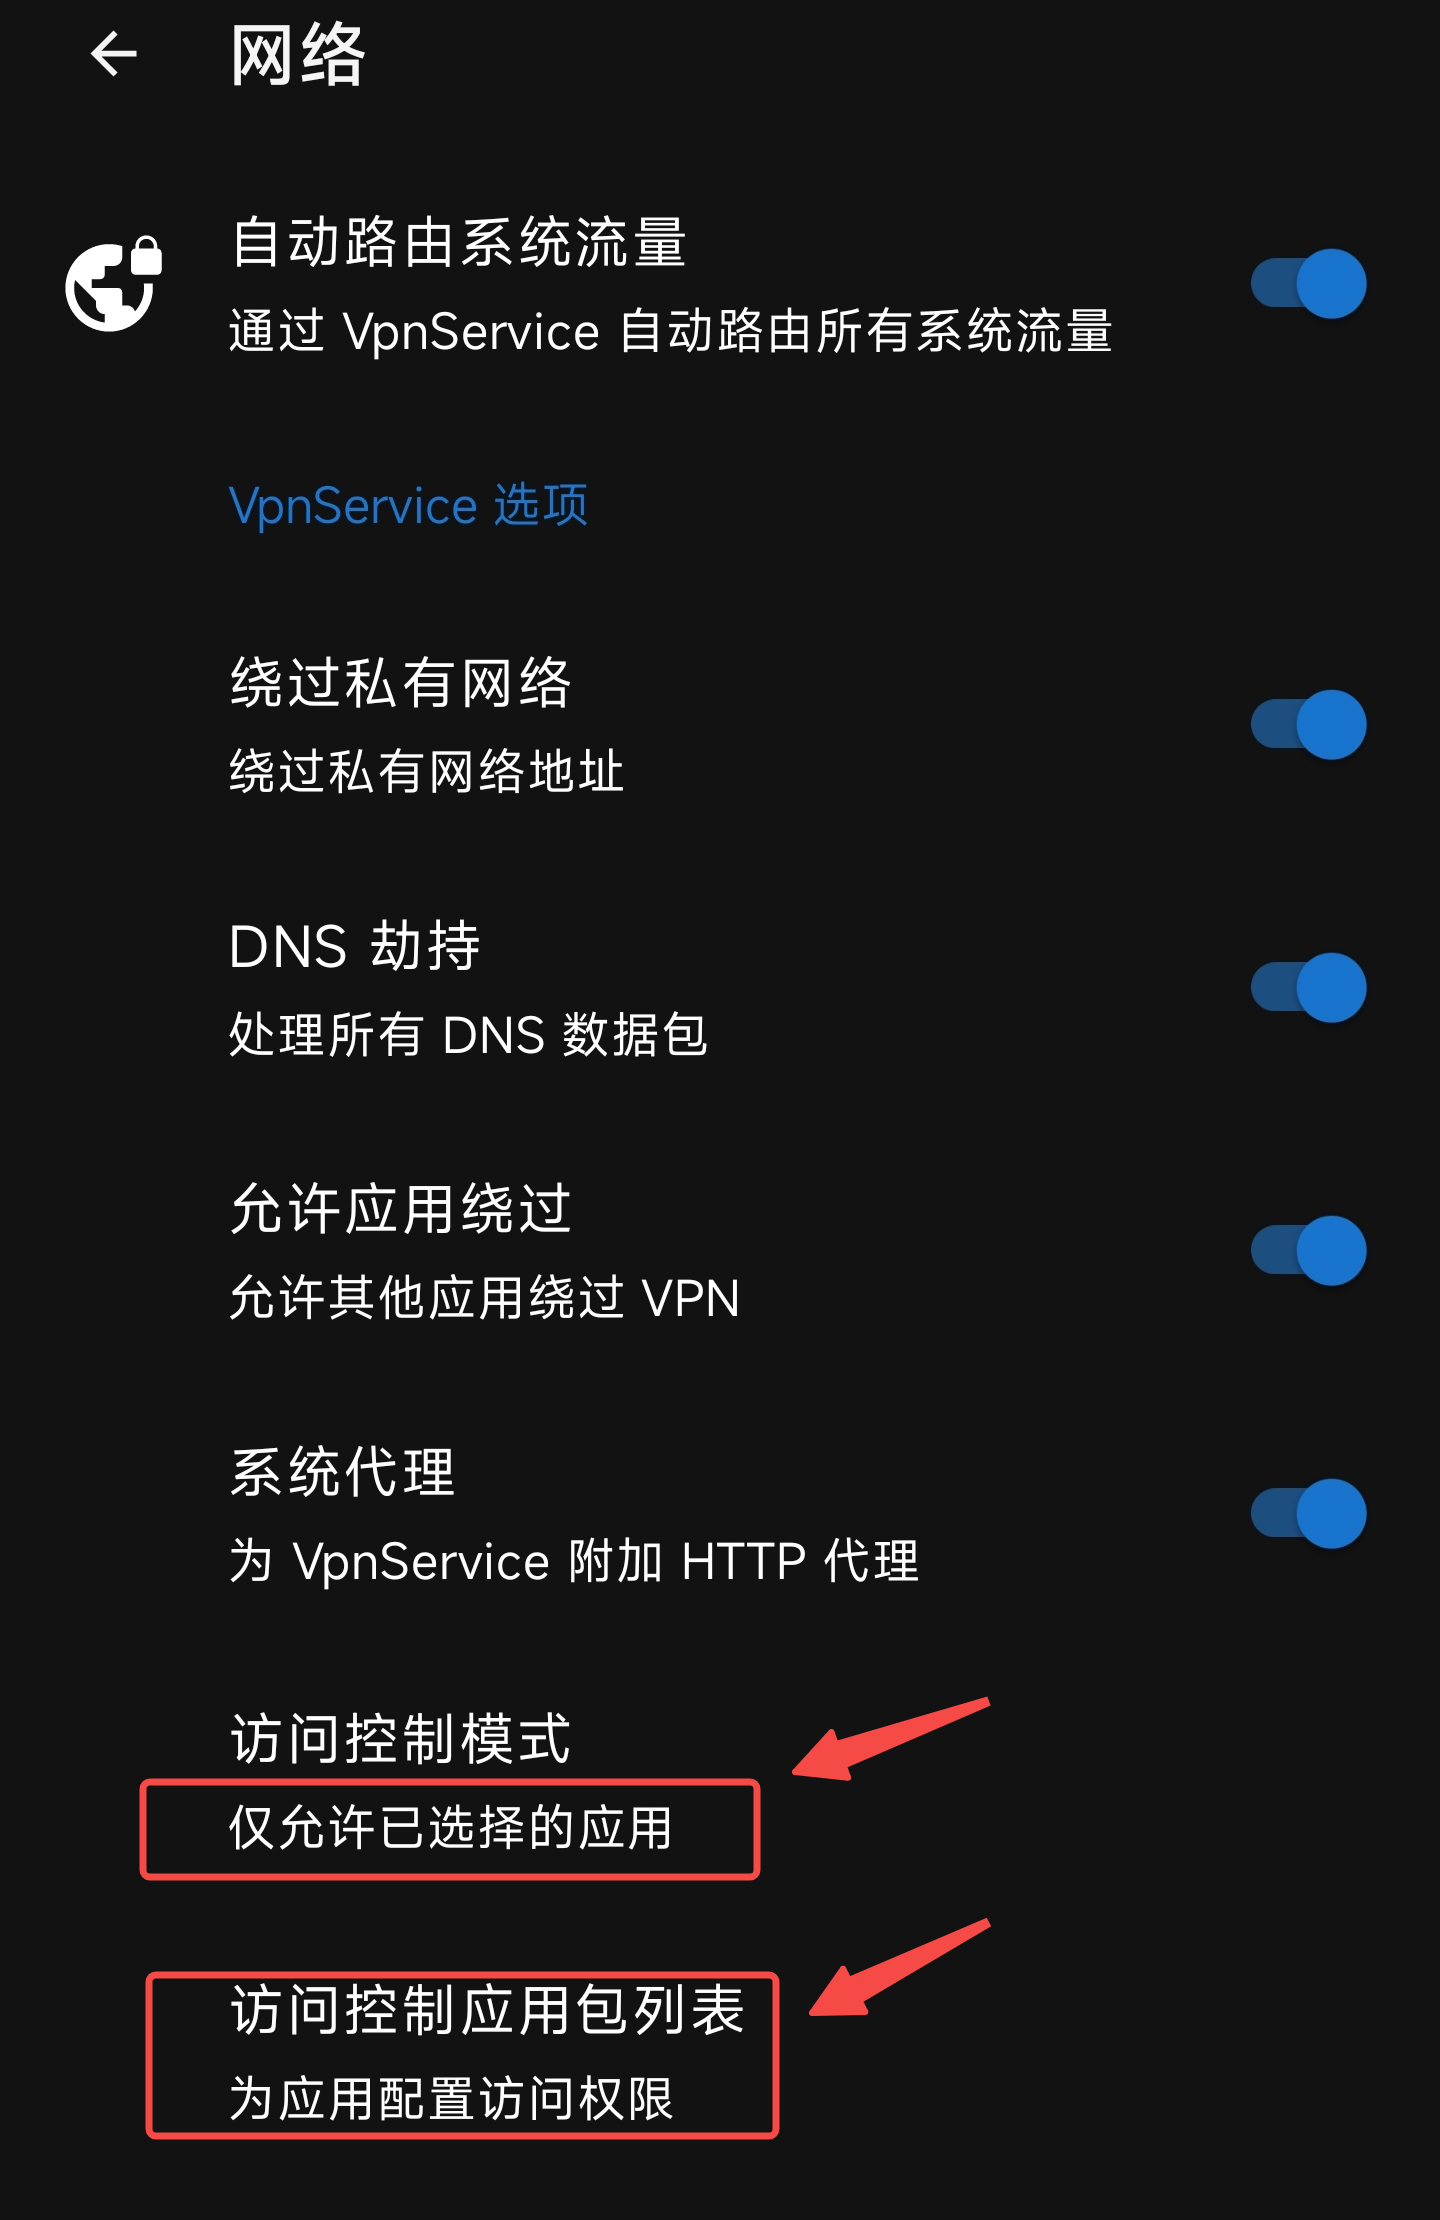  Access control mode of VpnService.